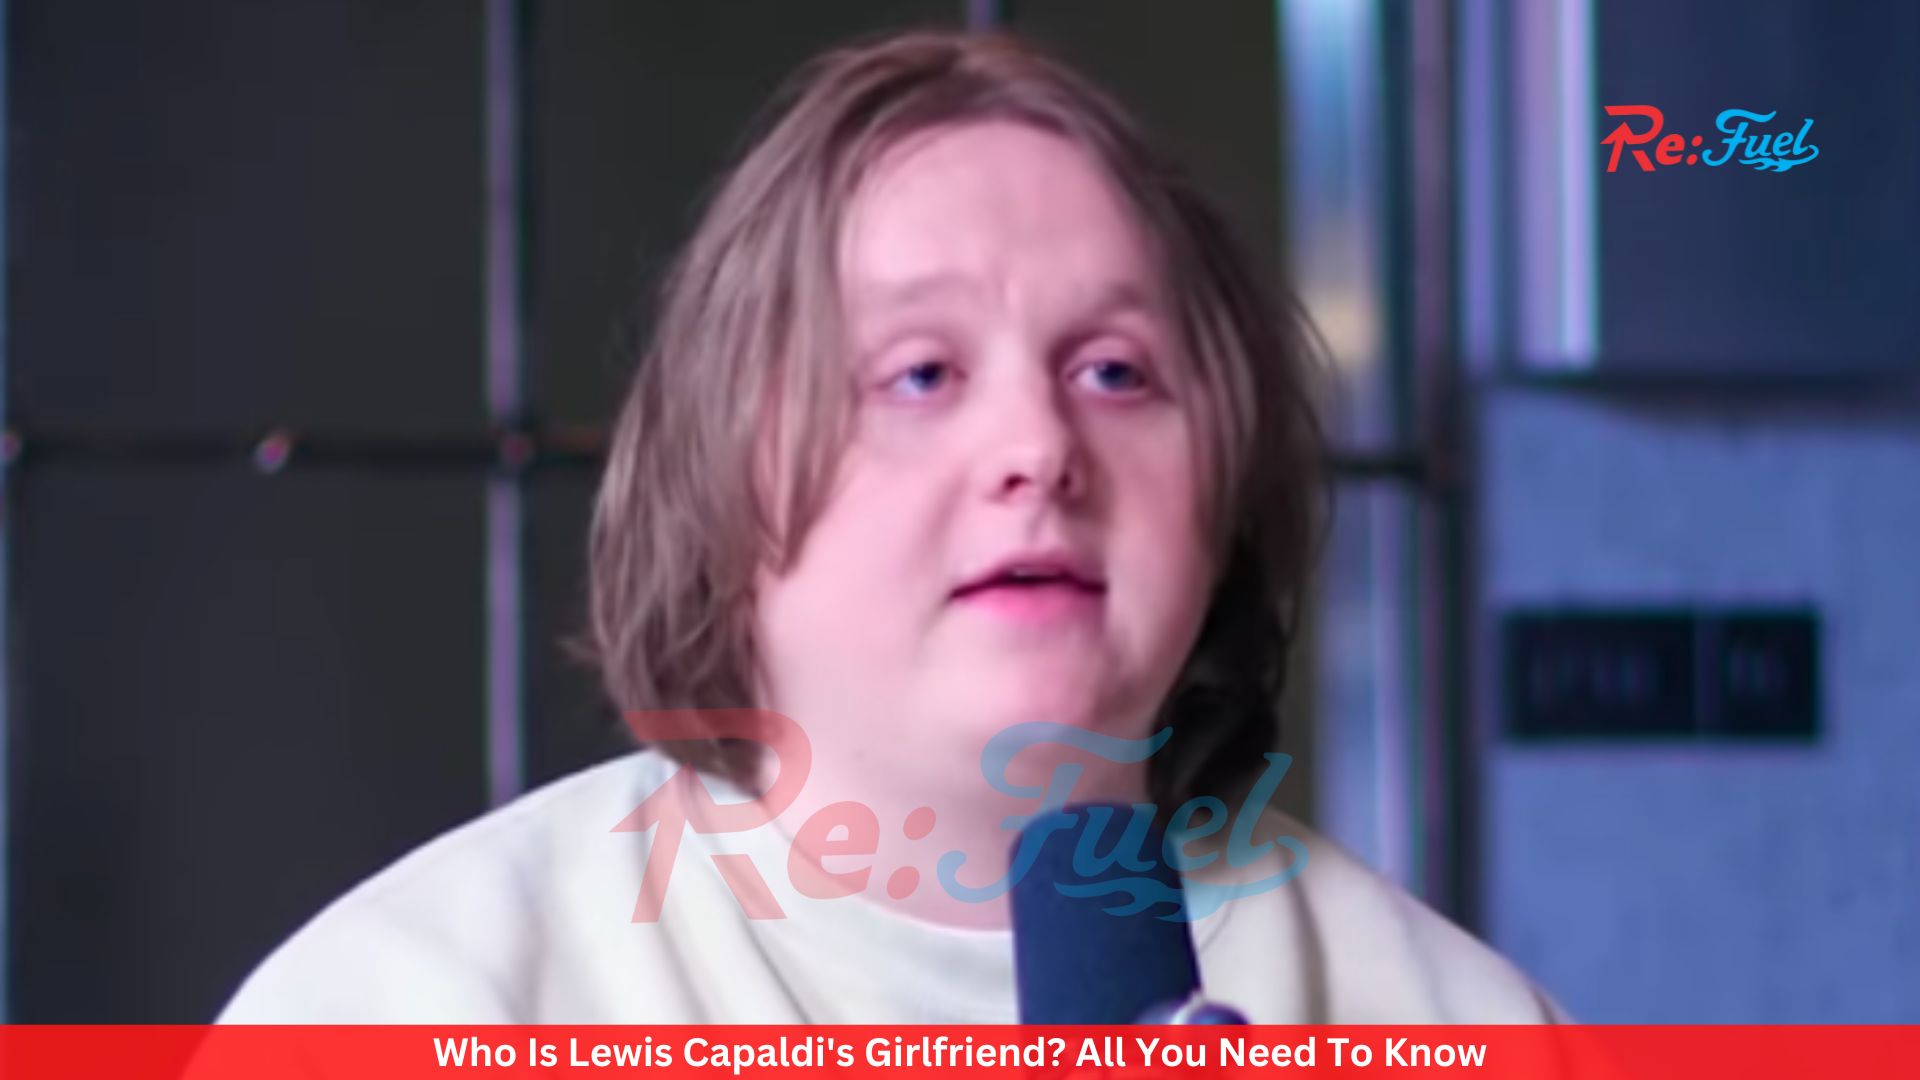 Who Is Lewis Capaldi's Girlfriend? All You Need To Know